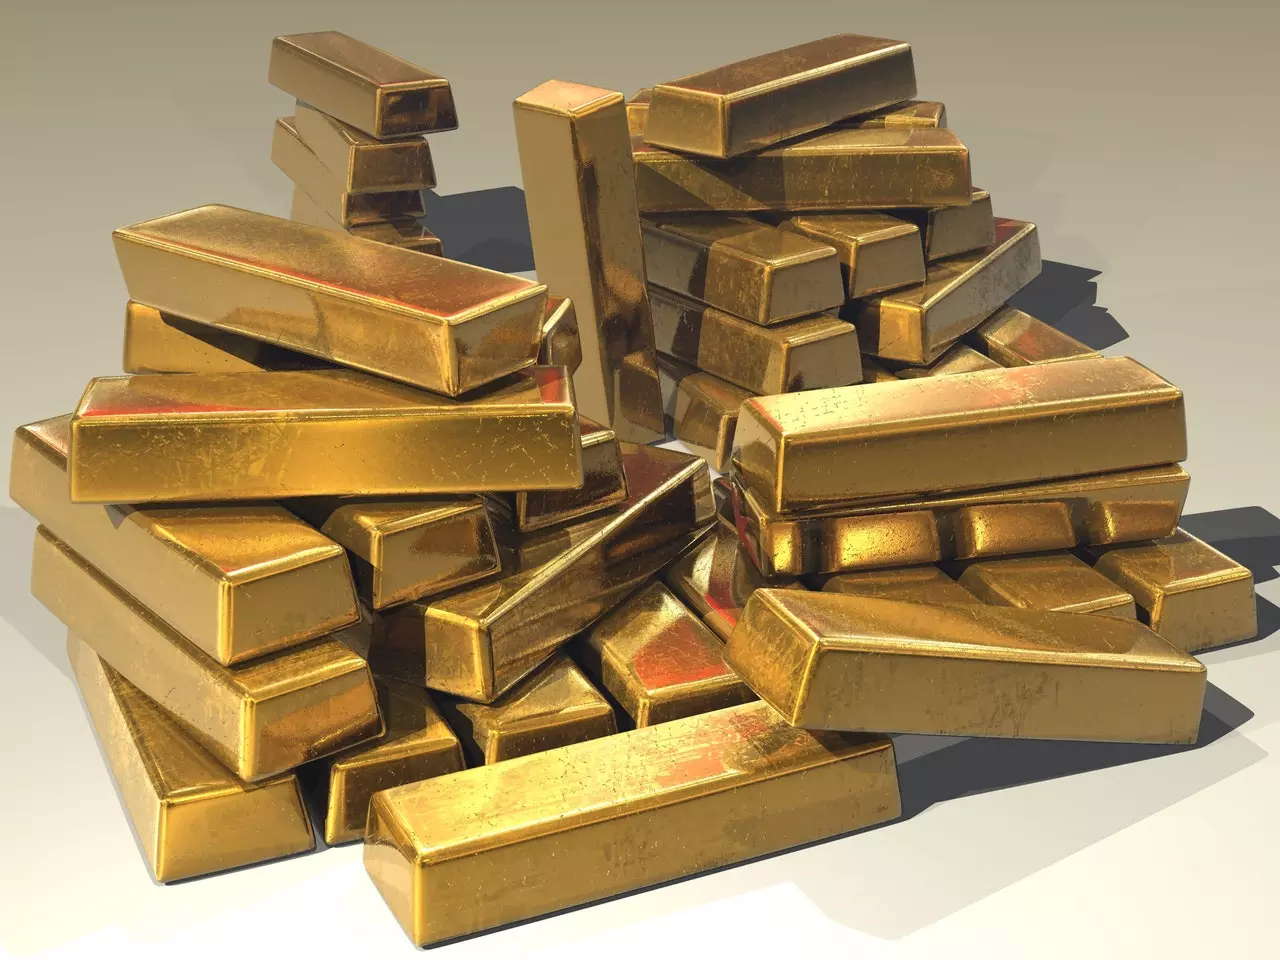 6 Good Reasons To Invest In Gold And Other Precious Metals